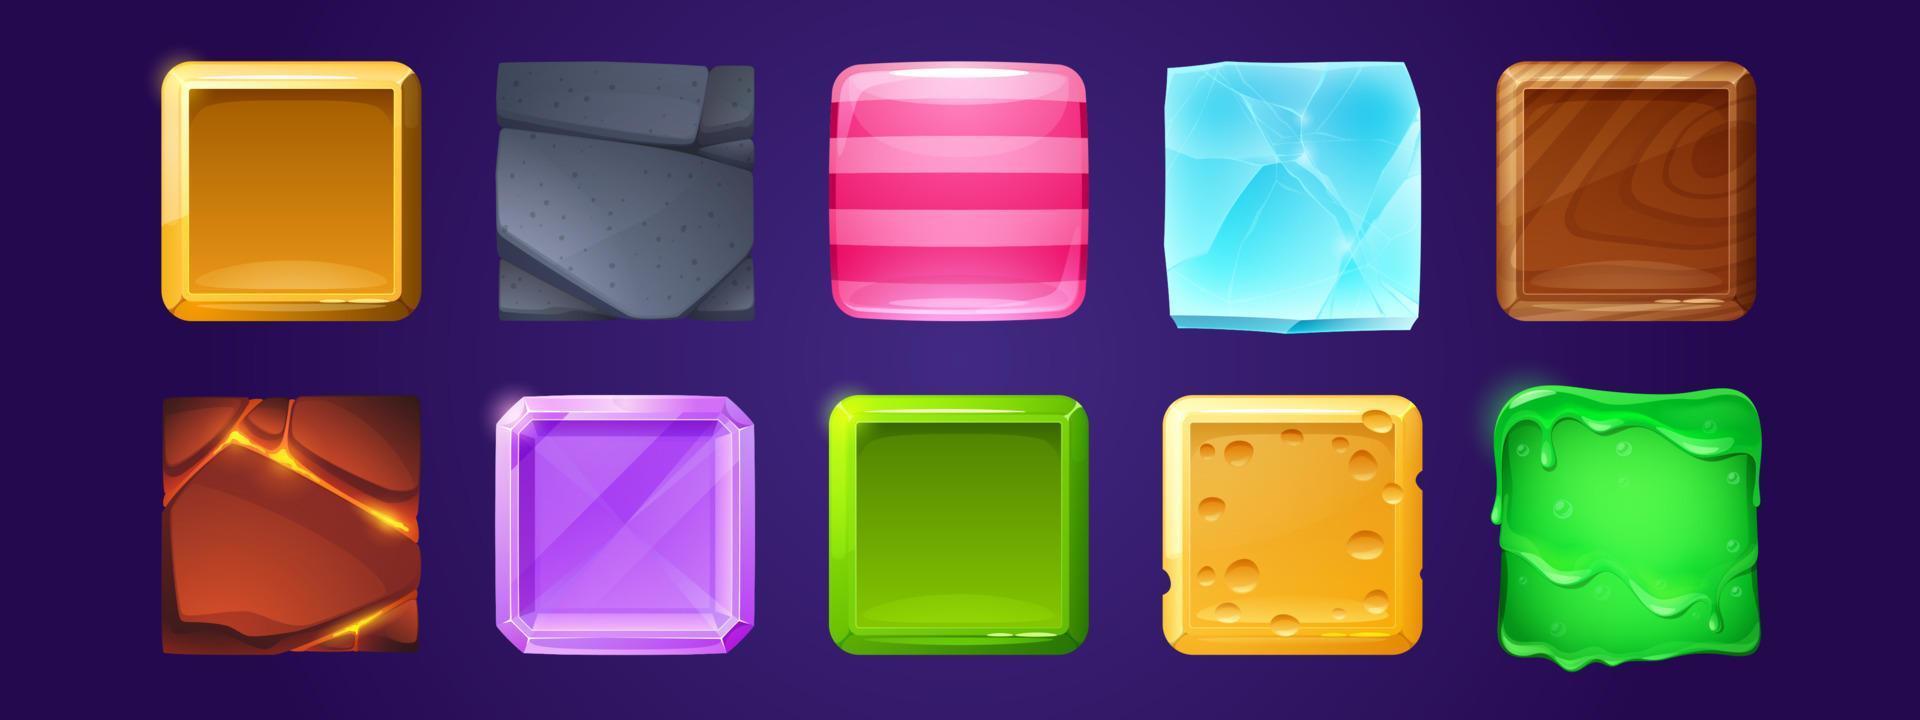 Square buttons for game with different textures vector